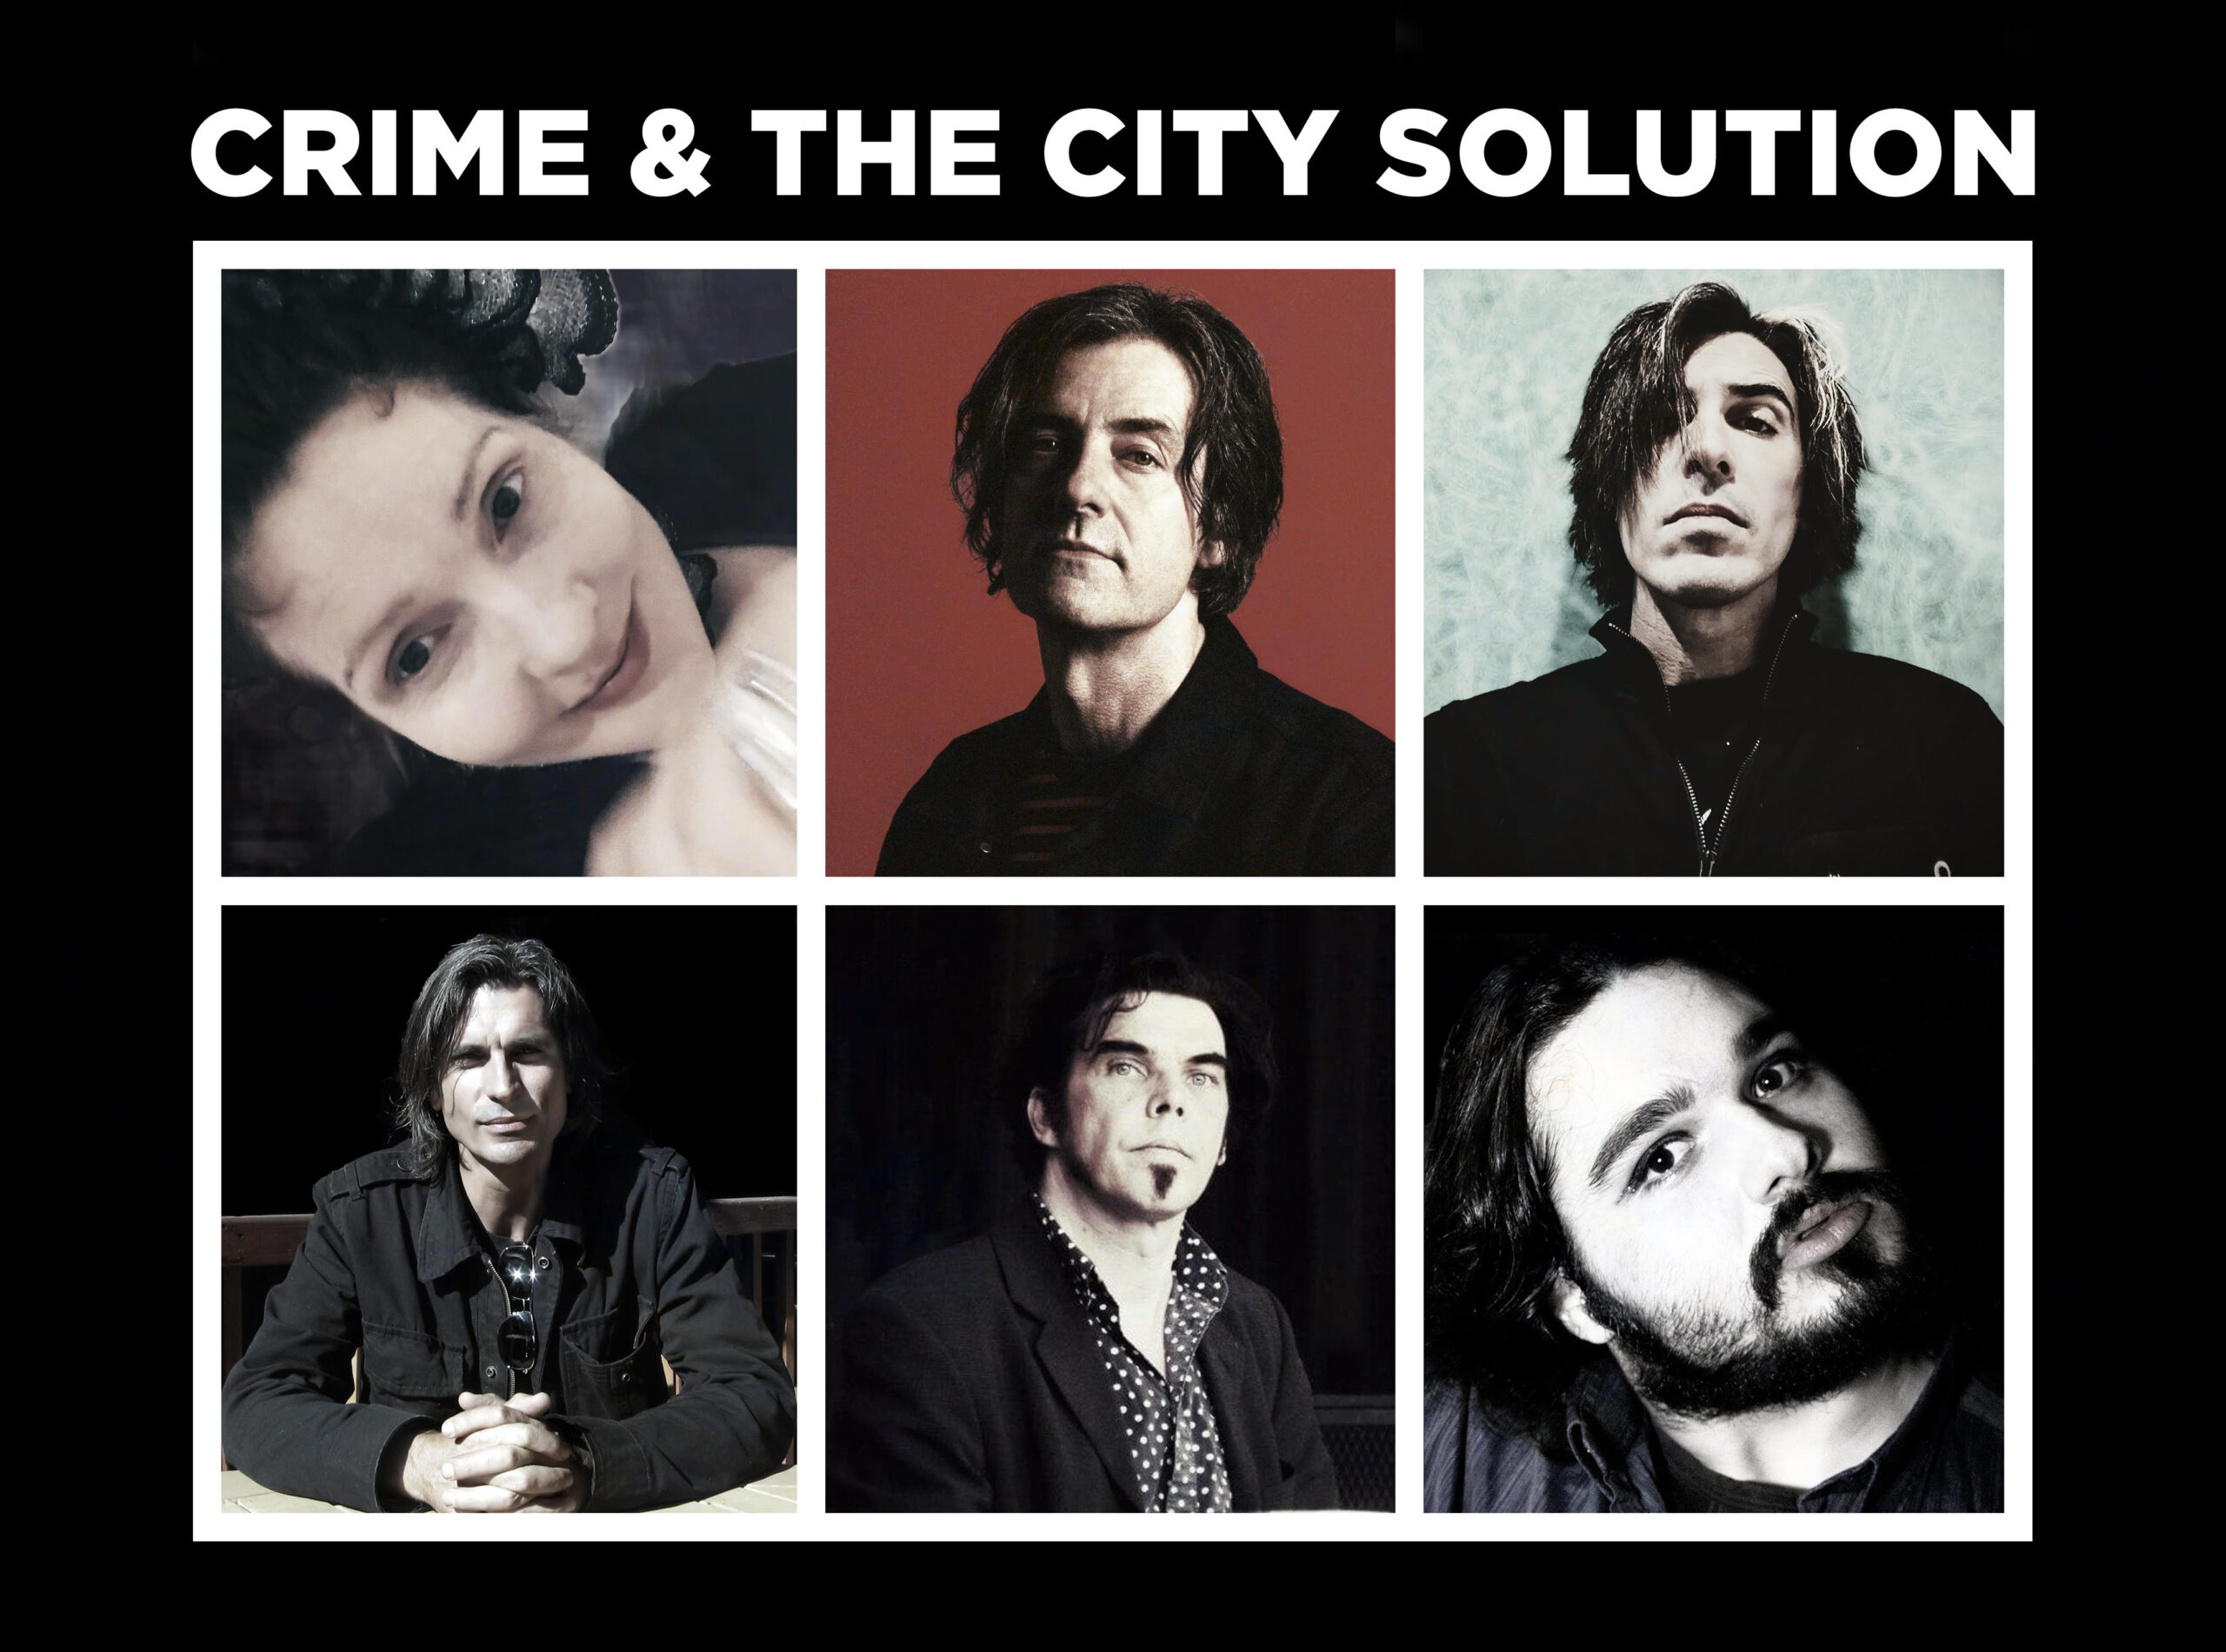 CRIME & THE CITY SOLUTION